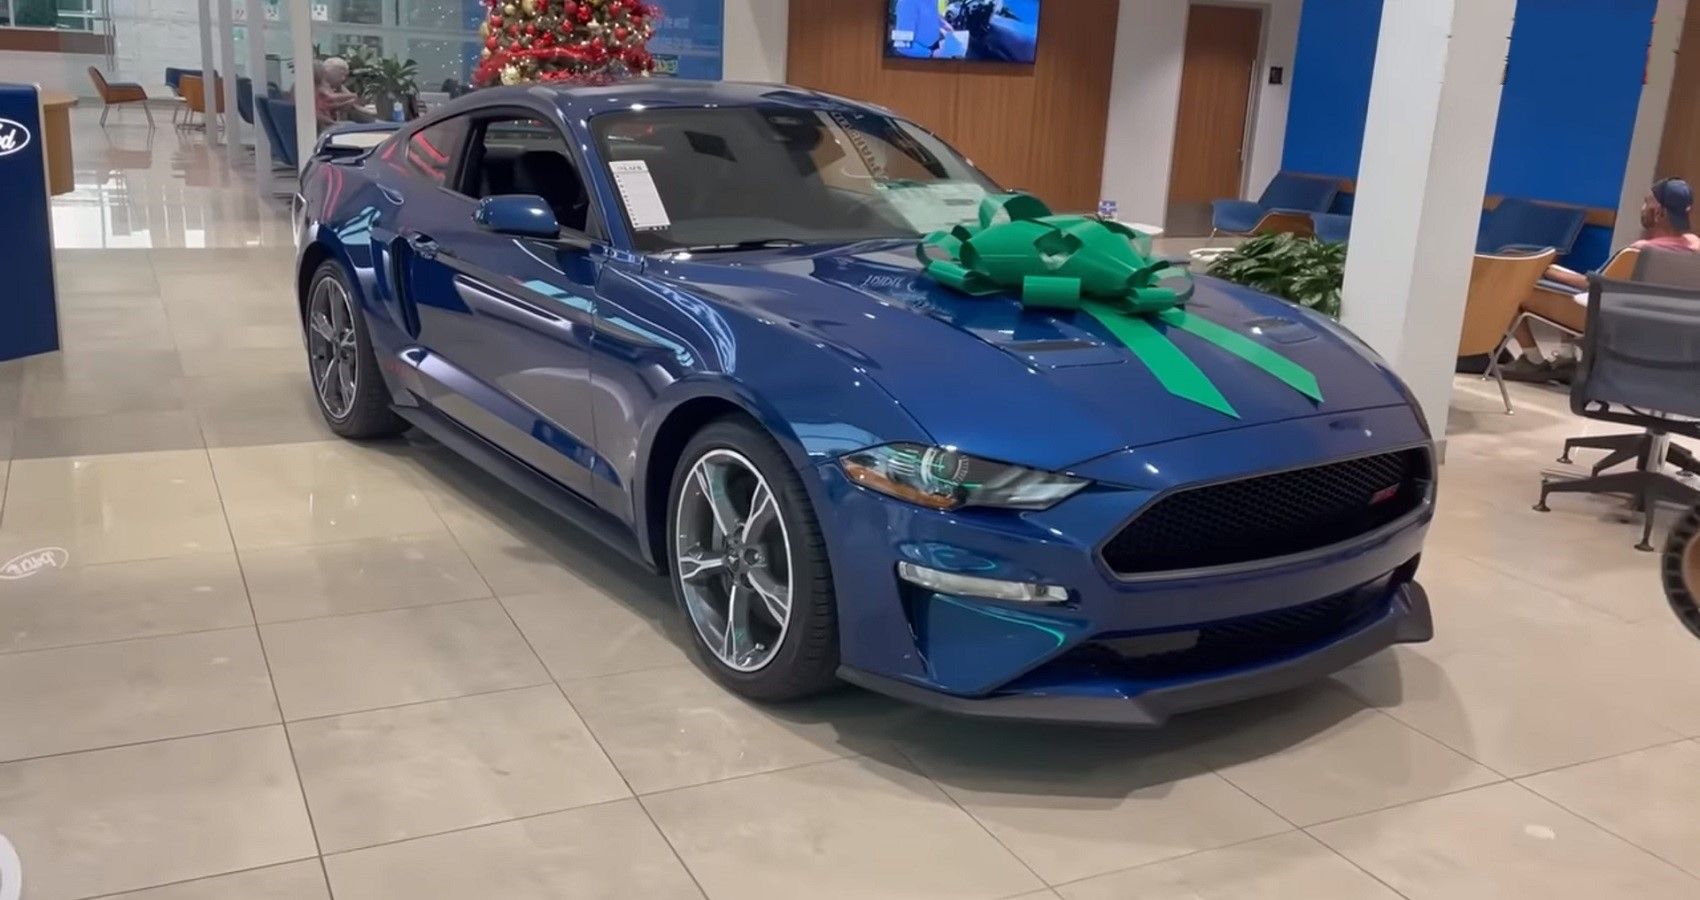 Ford Mustang S550 in dealership